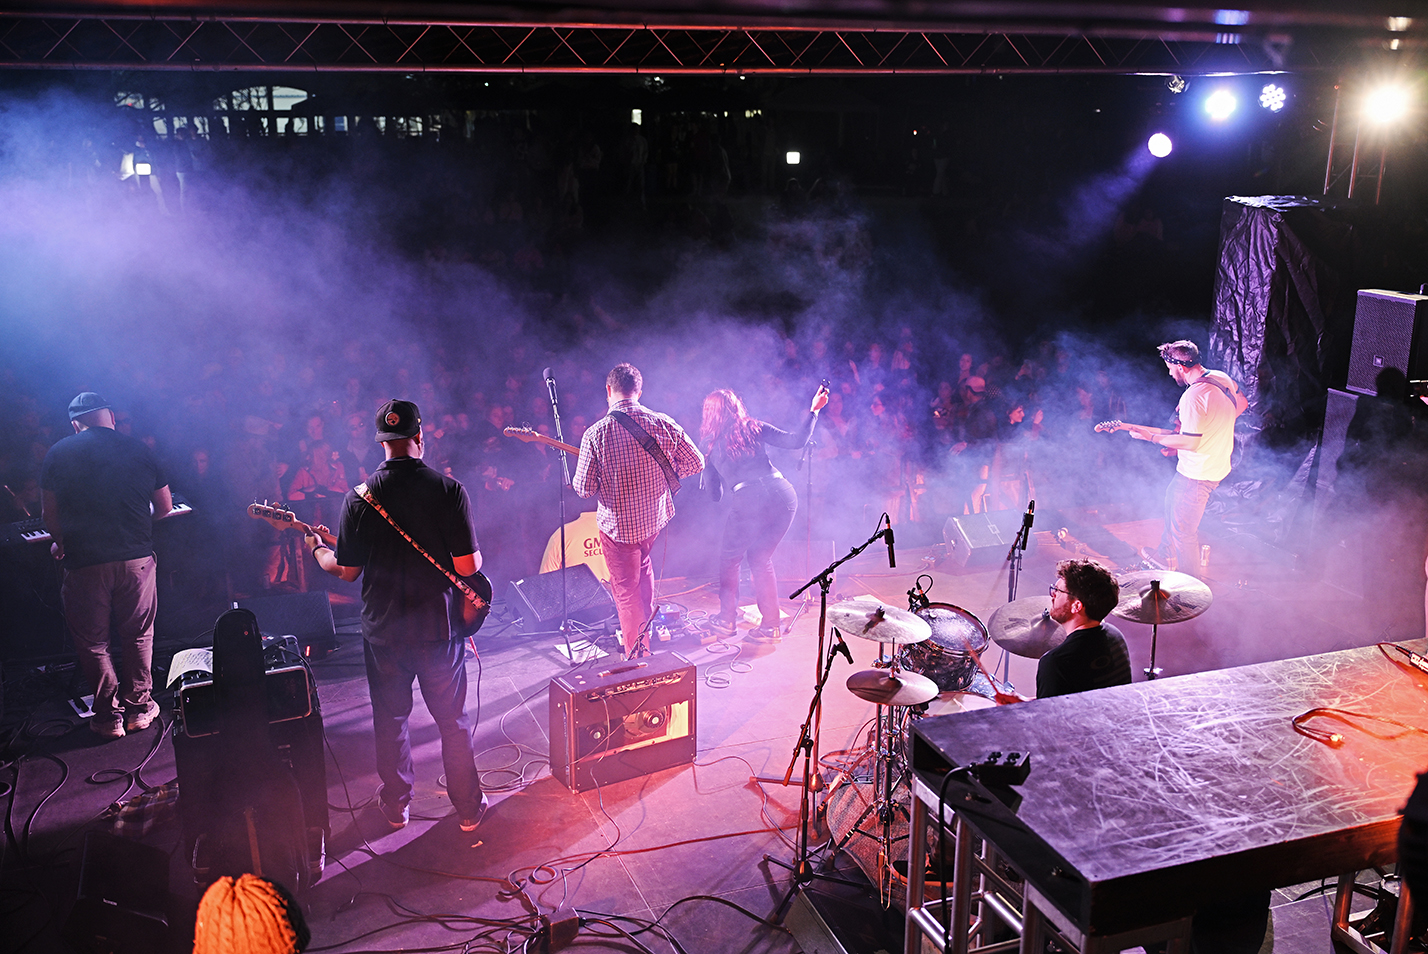 A band performs on stage as seen from behind with fog shrouding the audience.